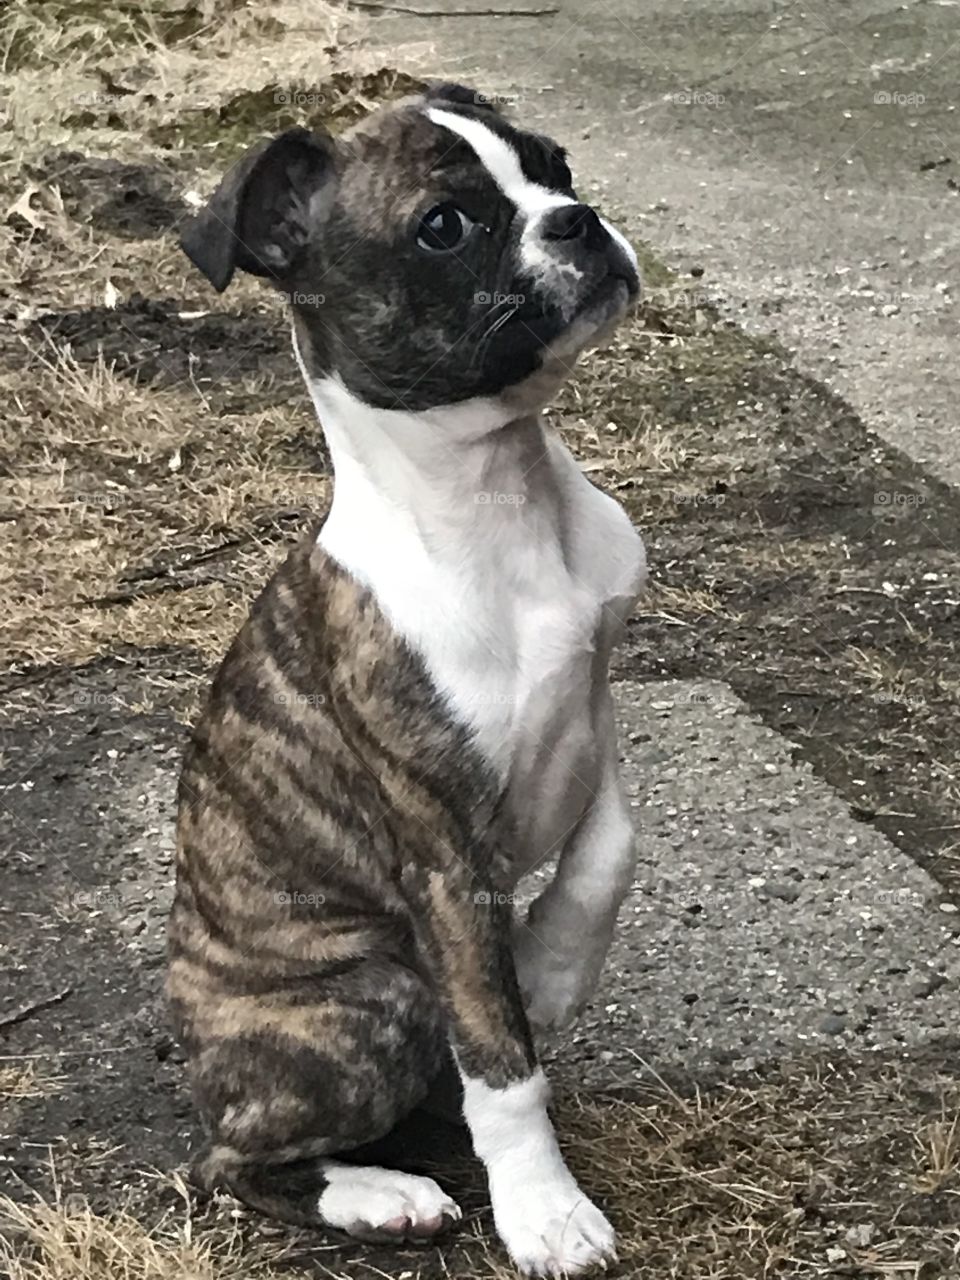 What a regal pose for a young puppy. She wants to sit and show off her brindle fur but she can’t contain her excitement and wonder at the world around her. 